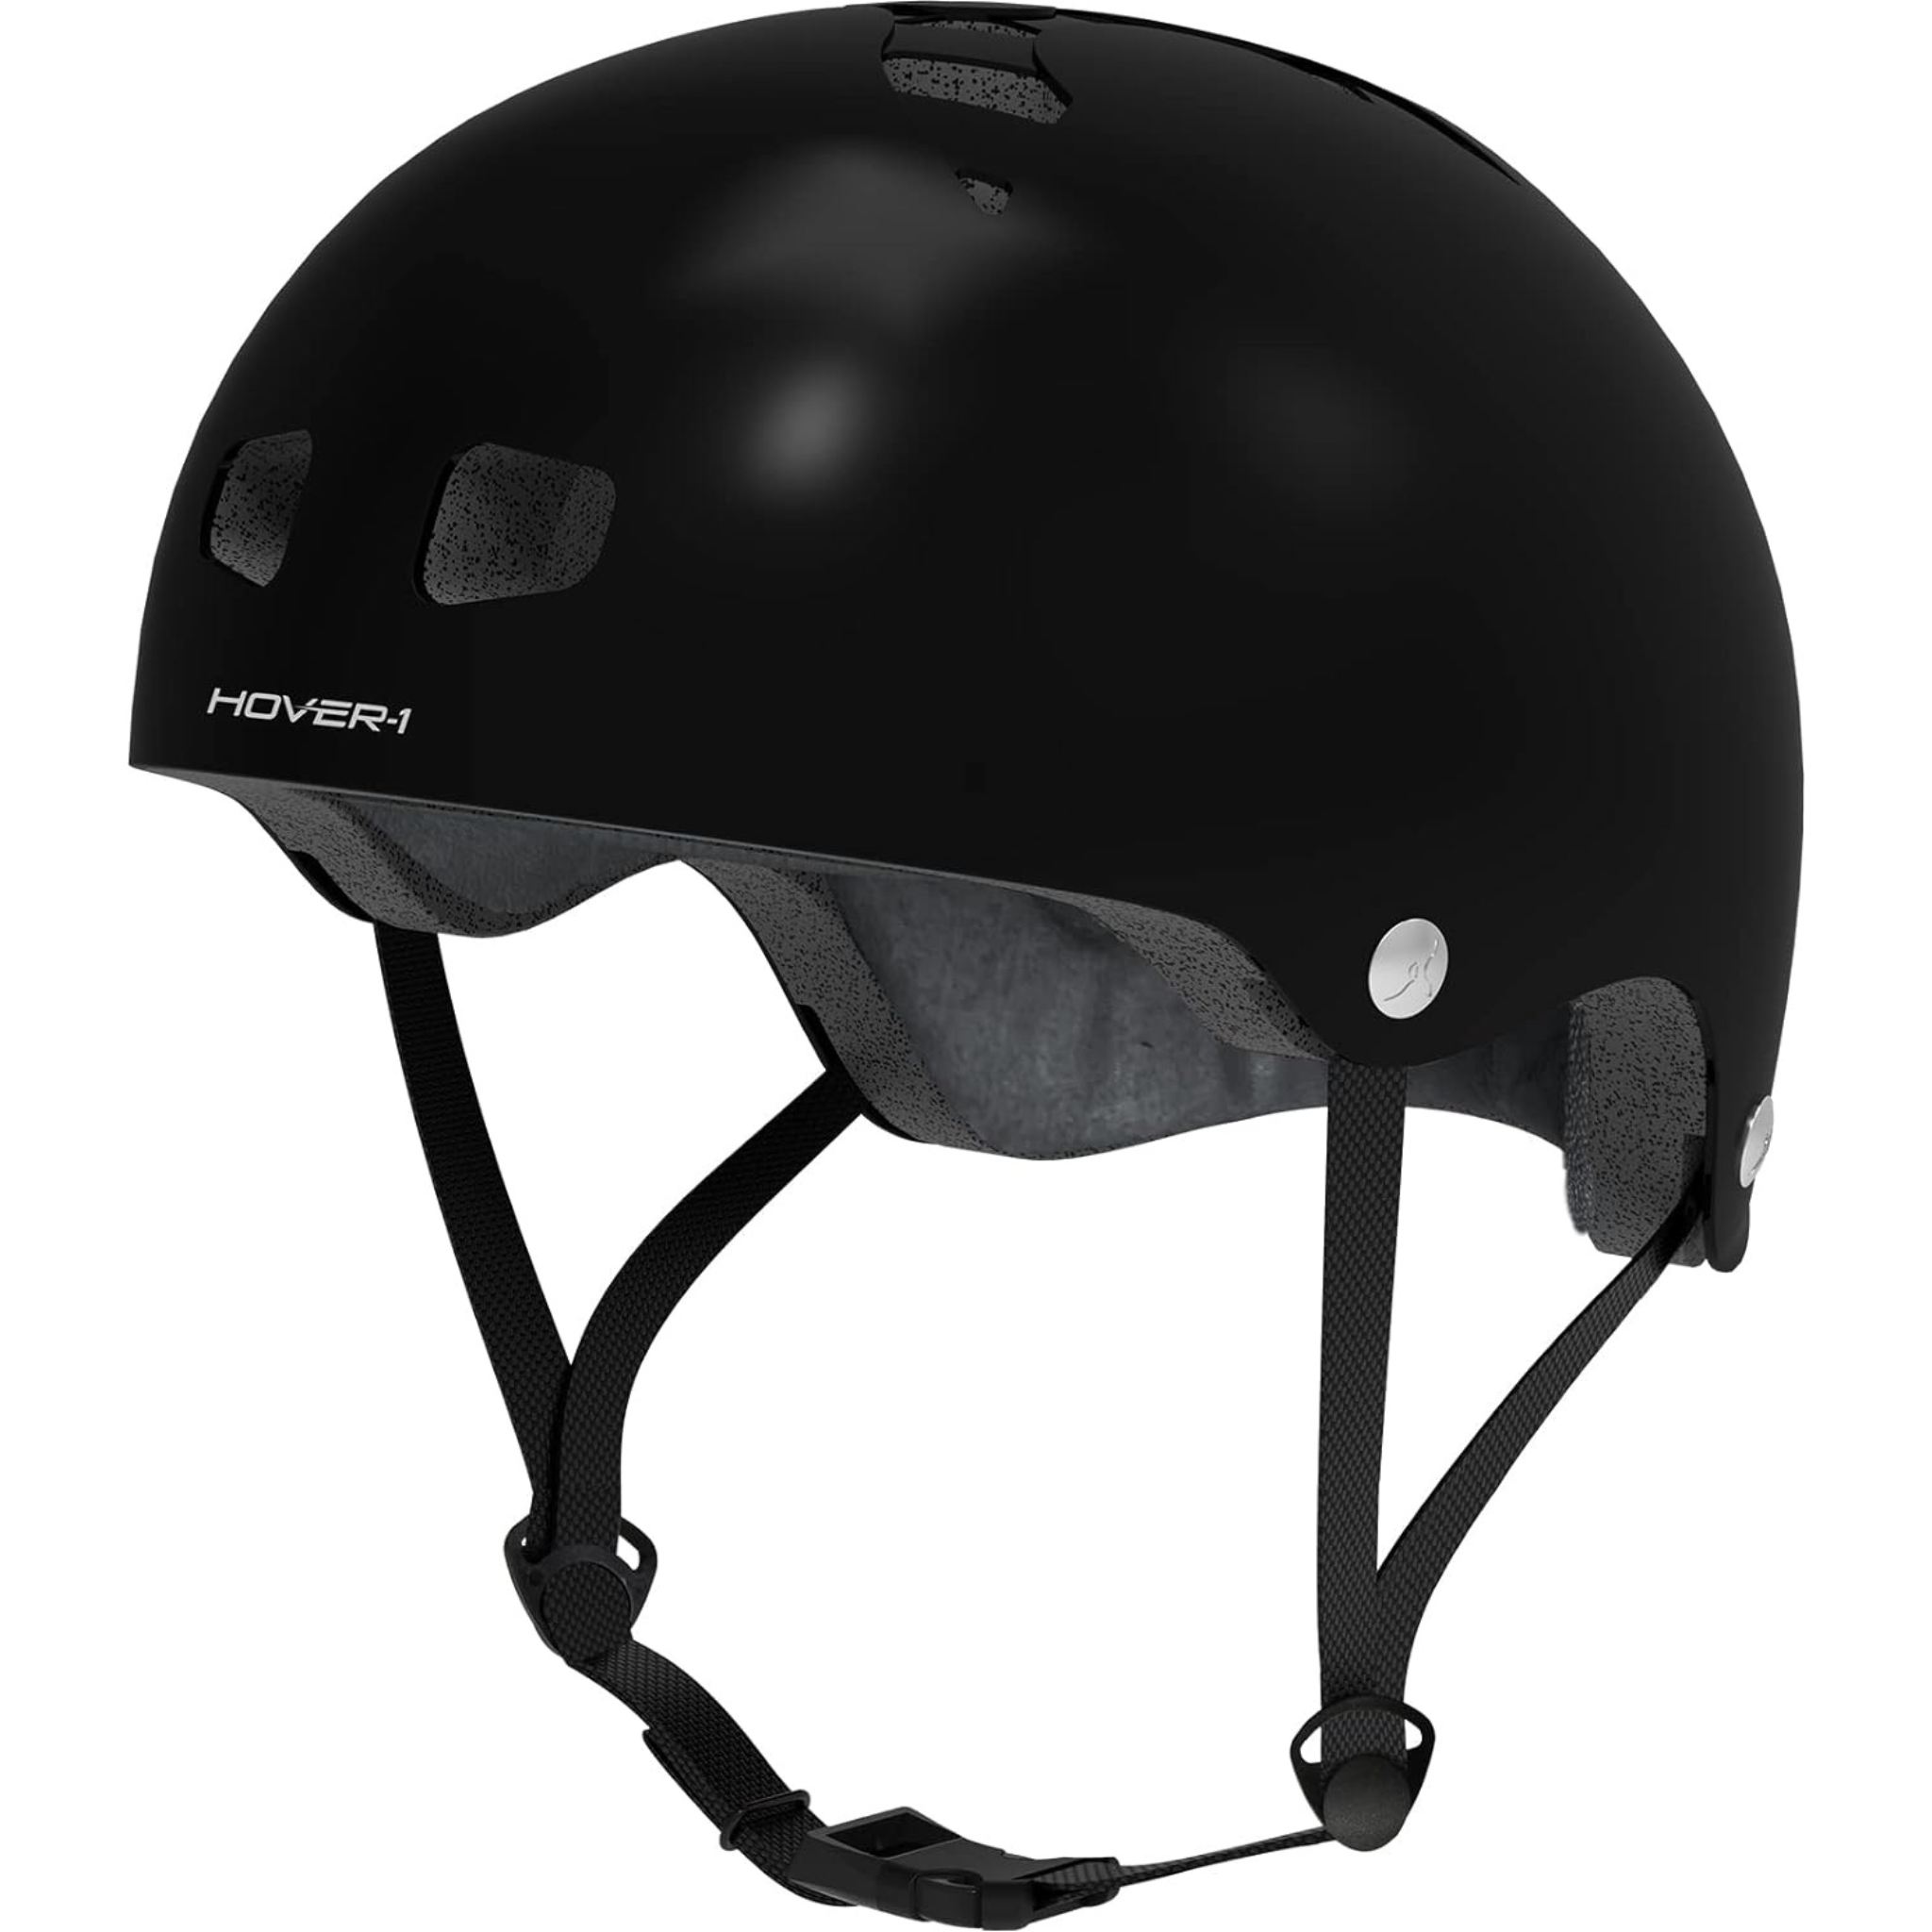 Hover-1 Size Small Sport Helmet